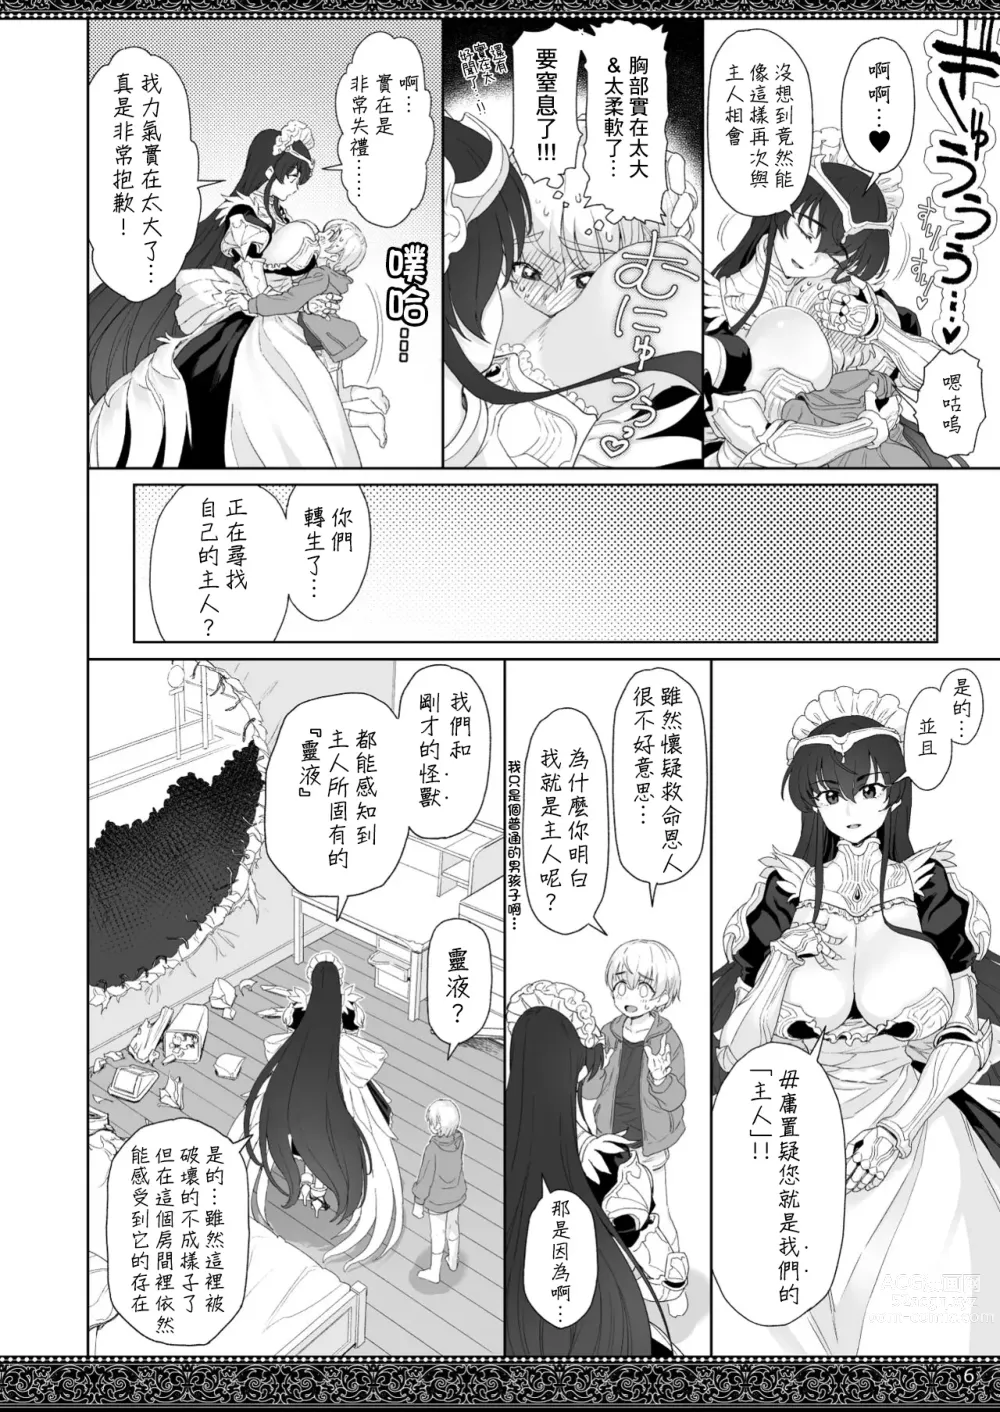 Page 6 of doujinshi 天上世界的女僕們